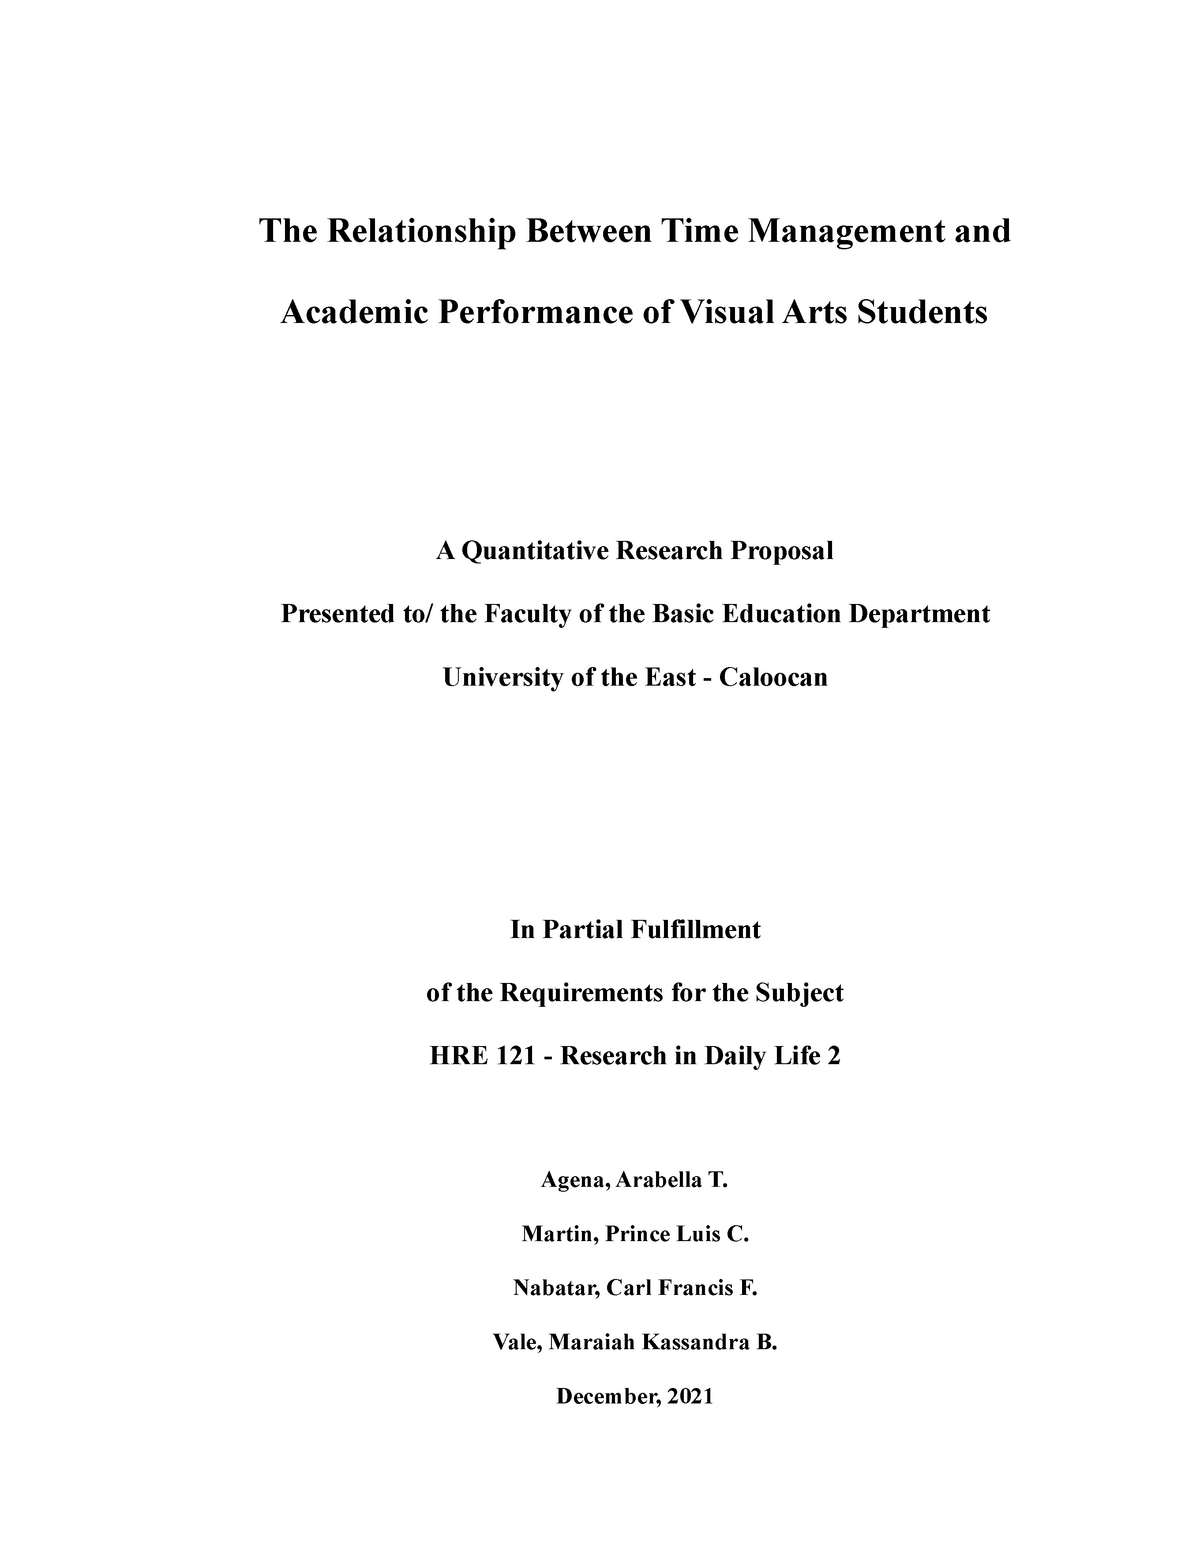 time management and academic performance thesis in the philippines